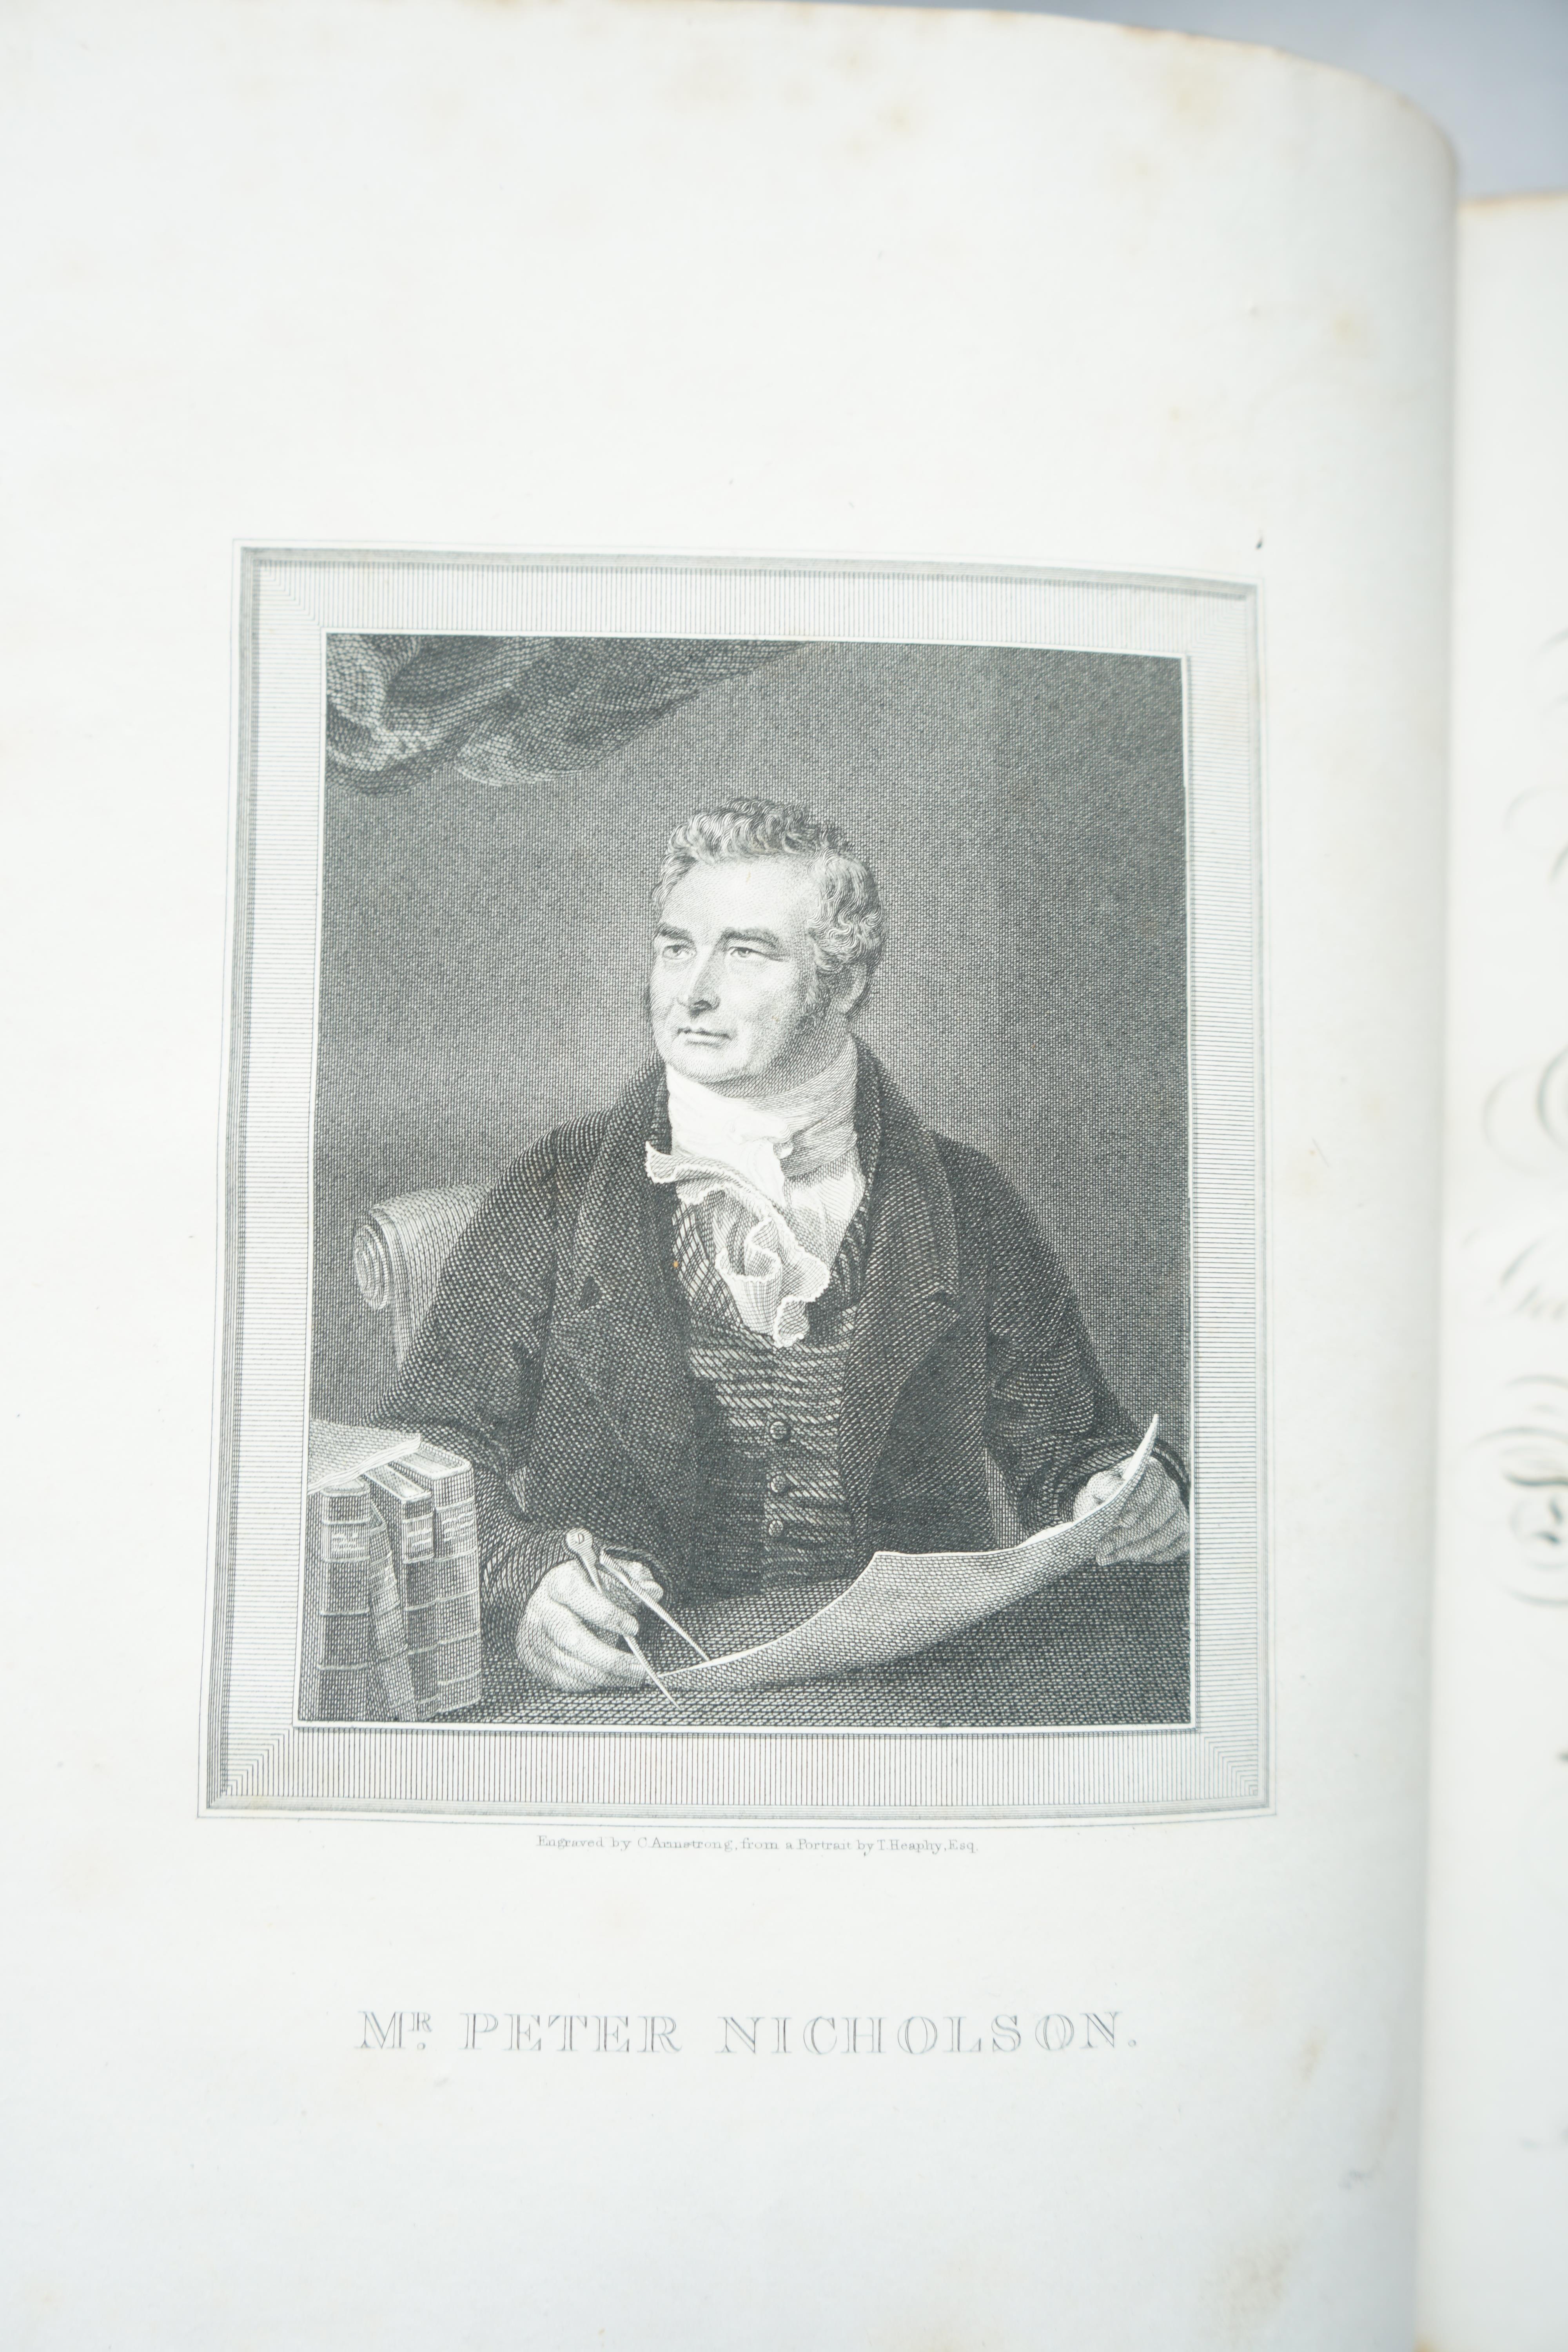 Nicholson, Peter - The Builder’s and Workman’s New Director, 4to, burr calf, with portrait frontispiece, engraved title and 141 plates, diagrams in text, John Day et al, London, 1824.